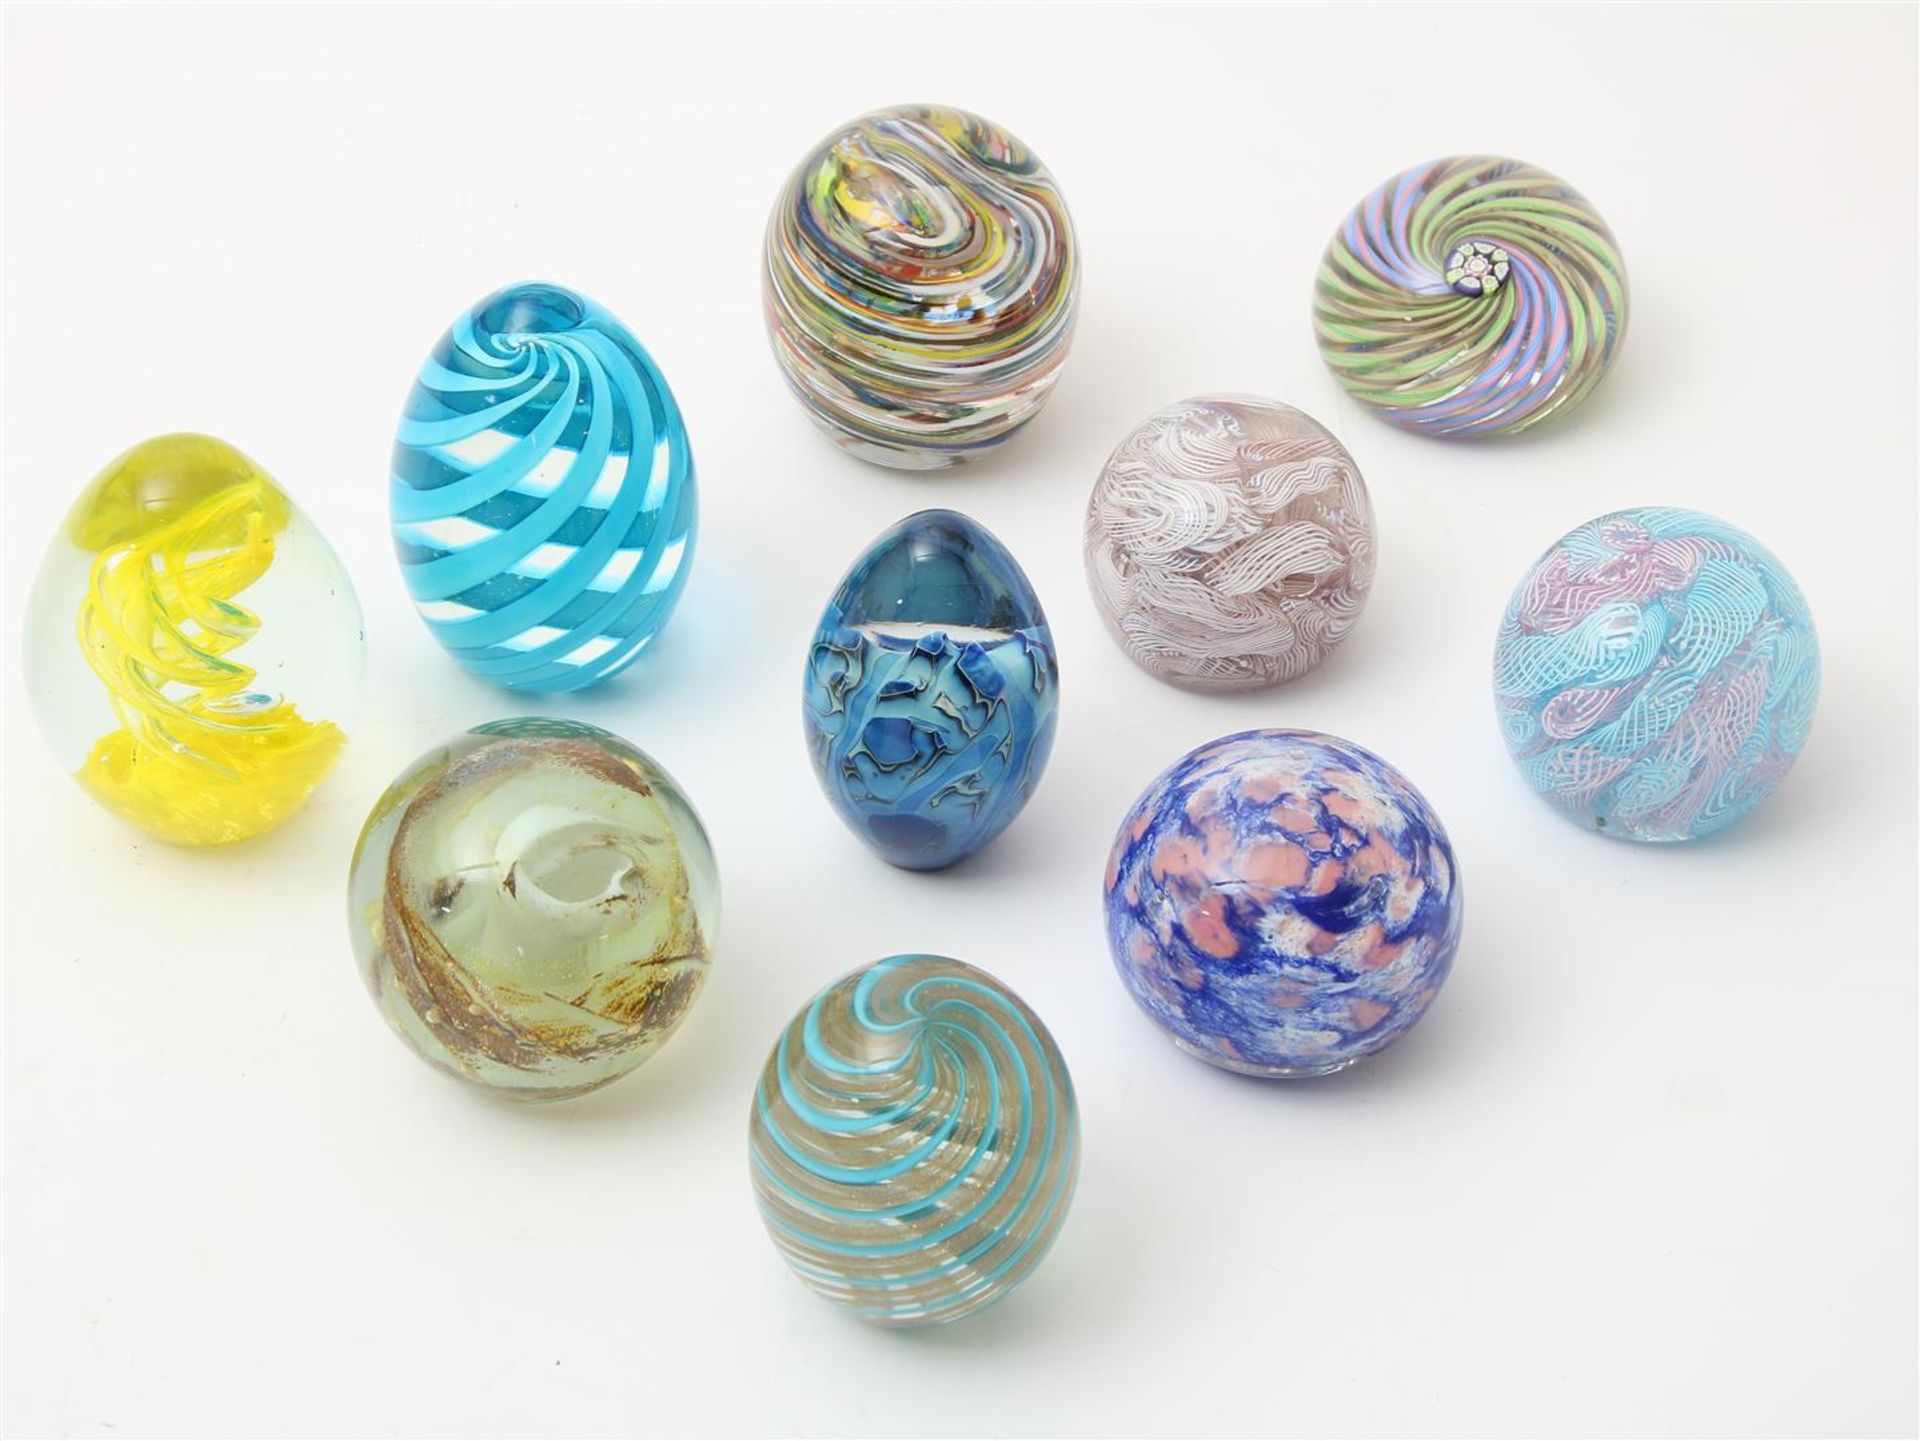 Series of 10 thick glass ball and egg shaped paperweights, with redeemed spiral decor, possibly